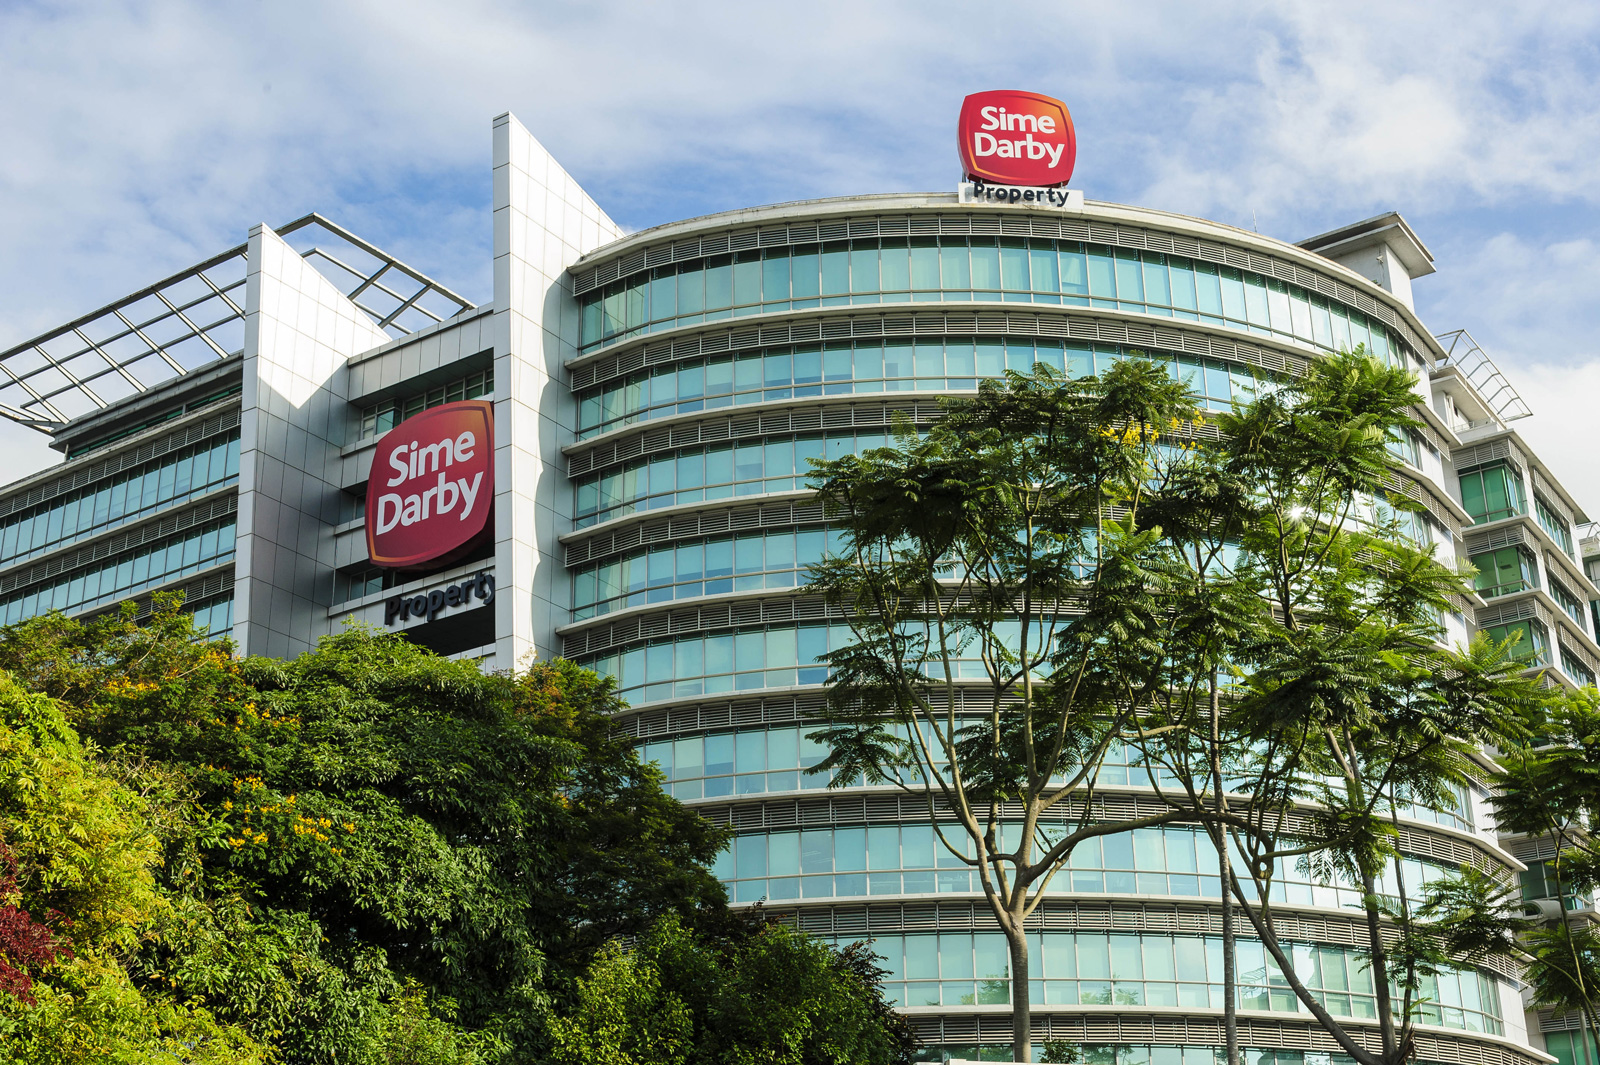 MARC Ratings noted Sime Darby Property